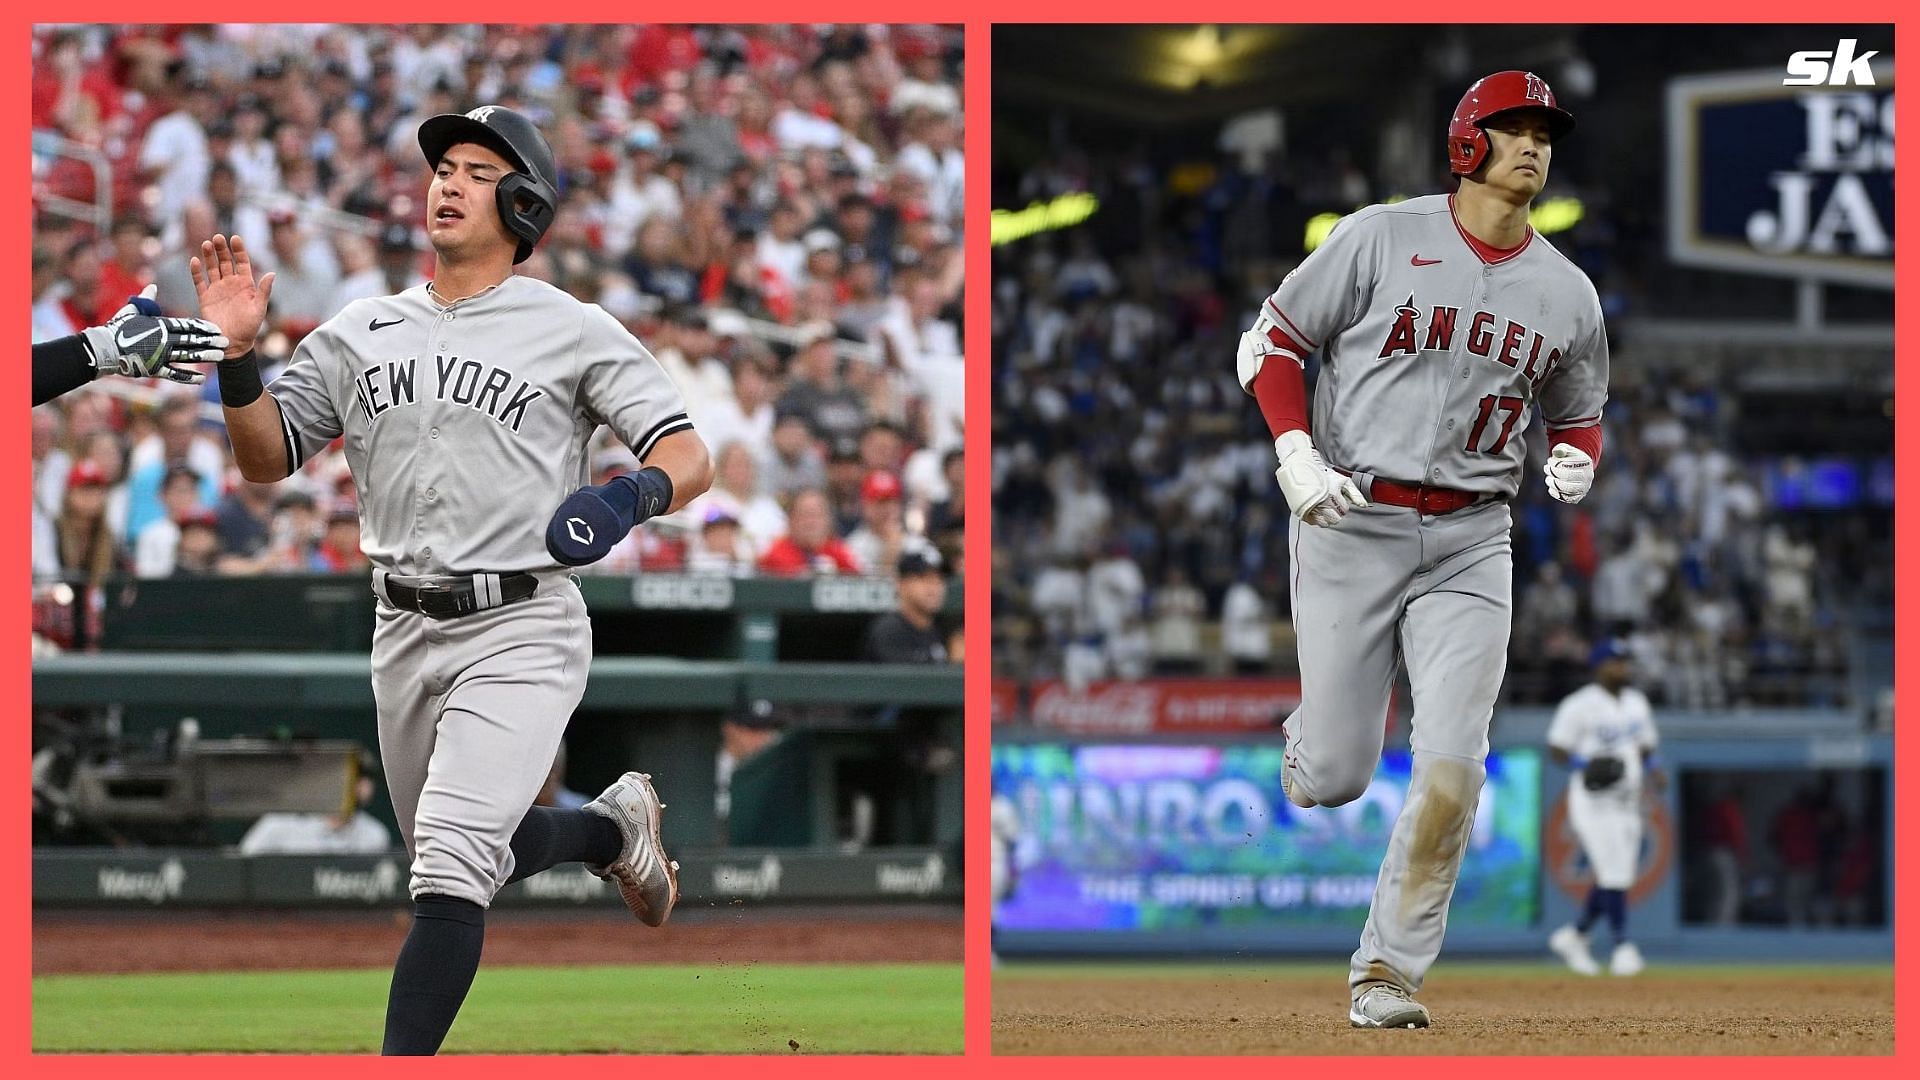 Shohei Ohtani hit the game tying home run against the New York Yankees as the away team